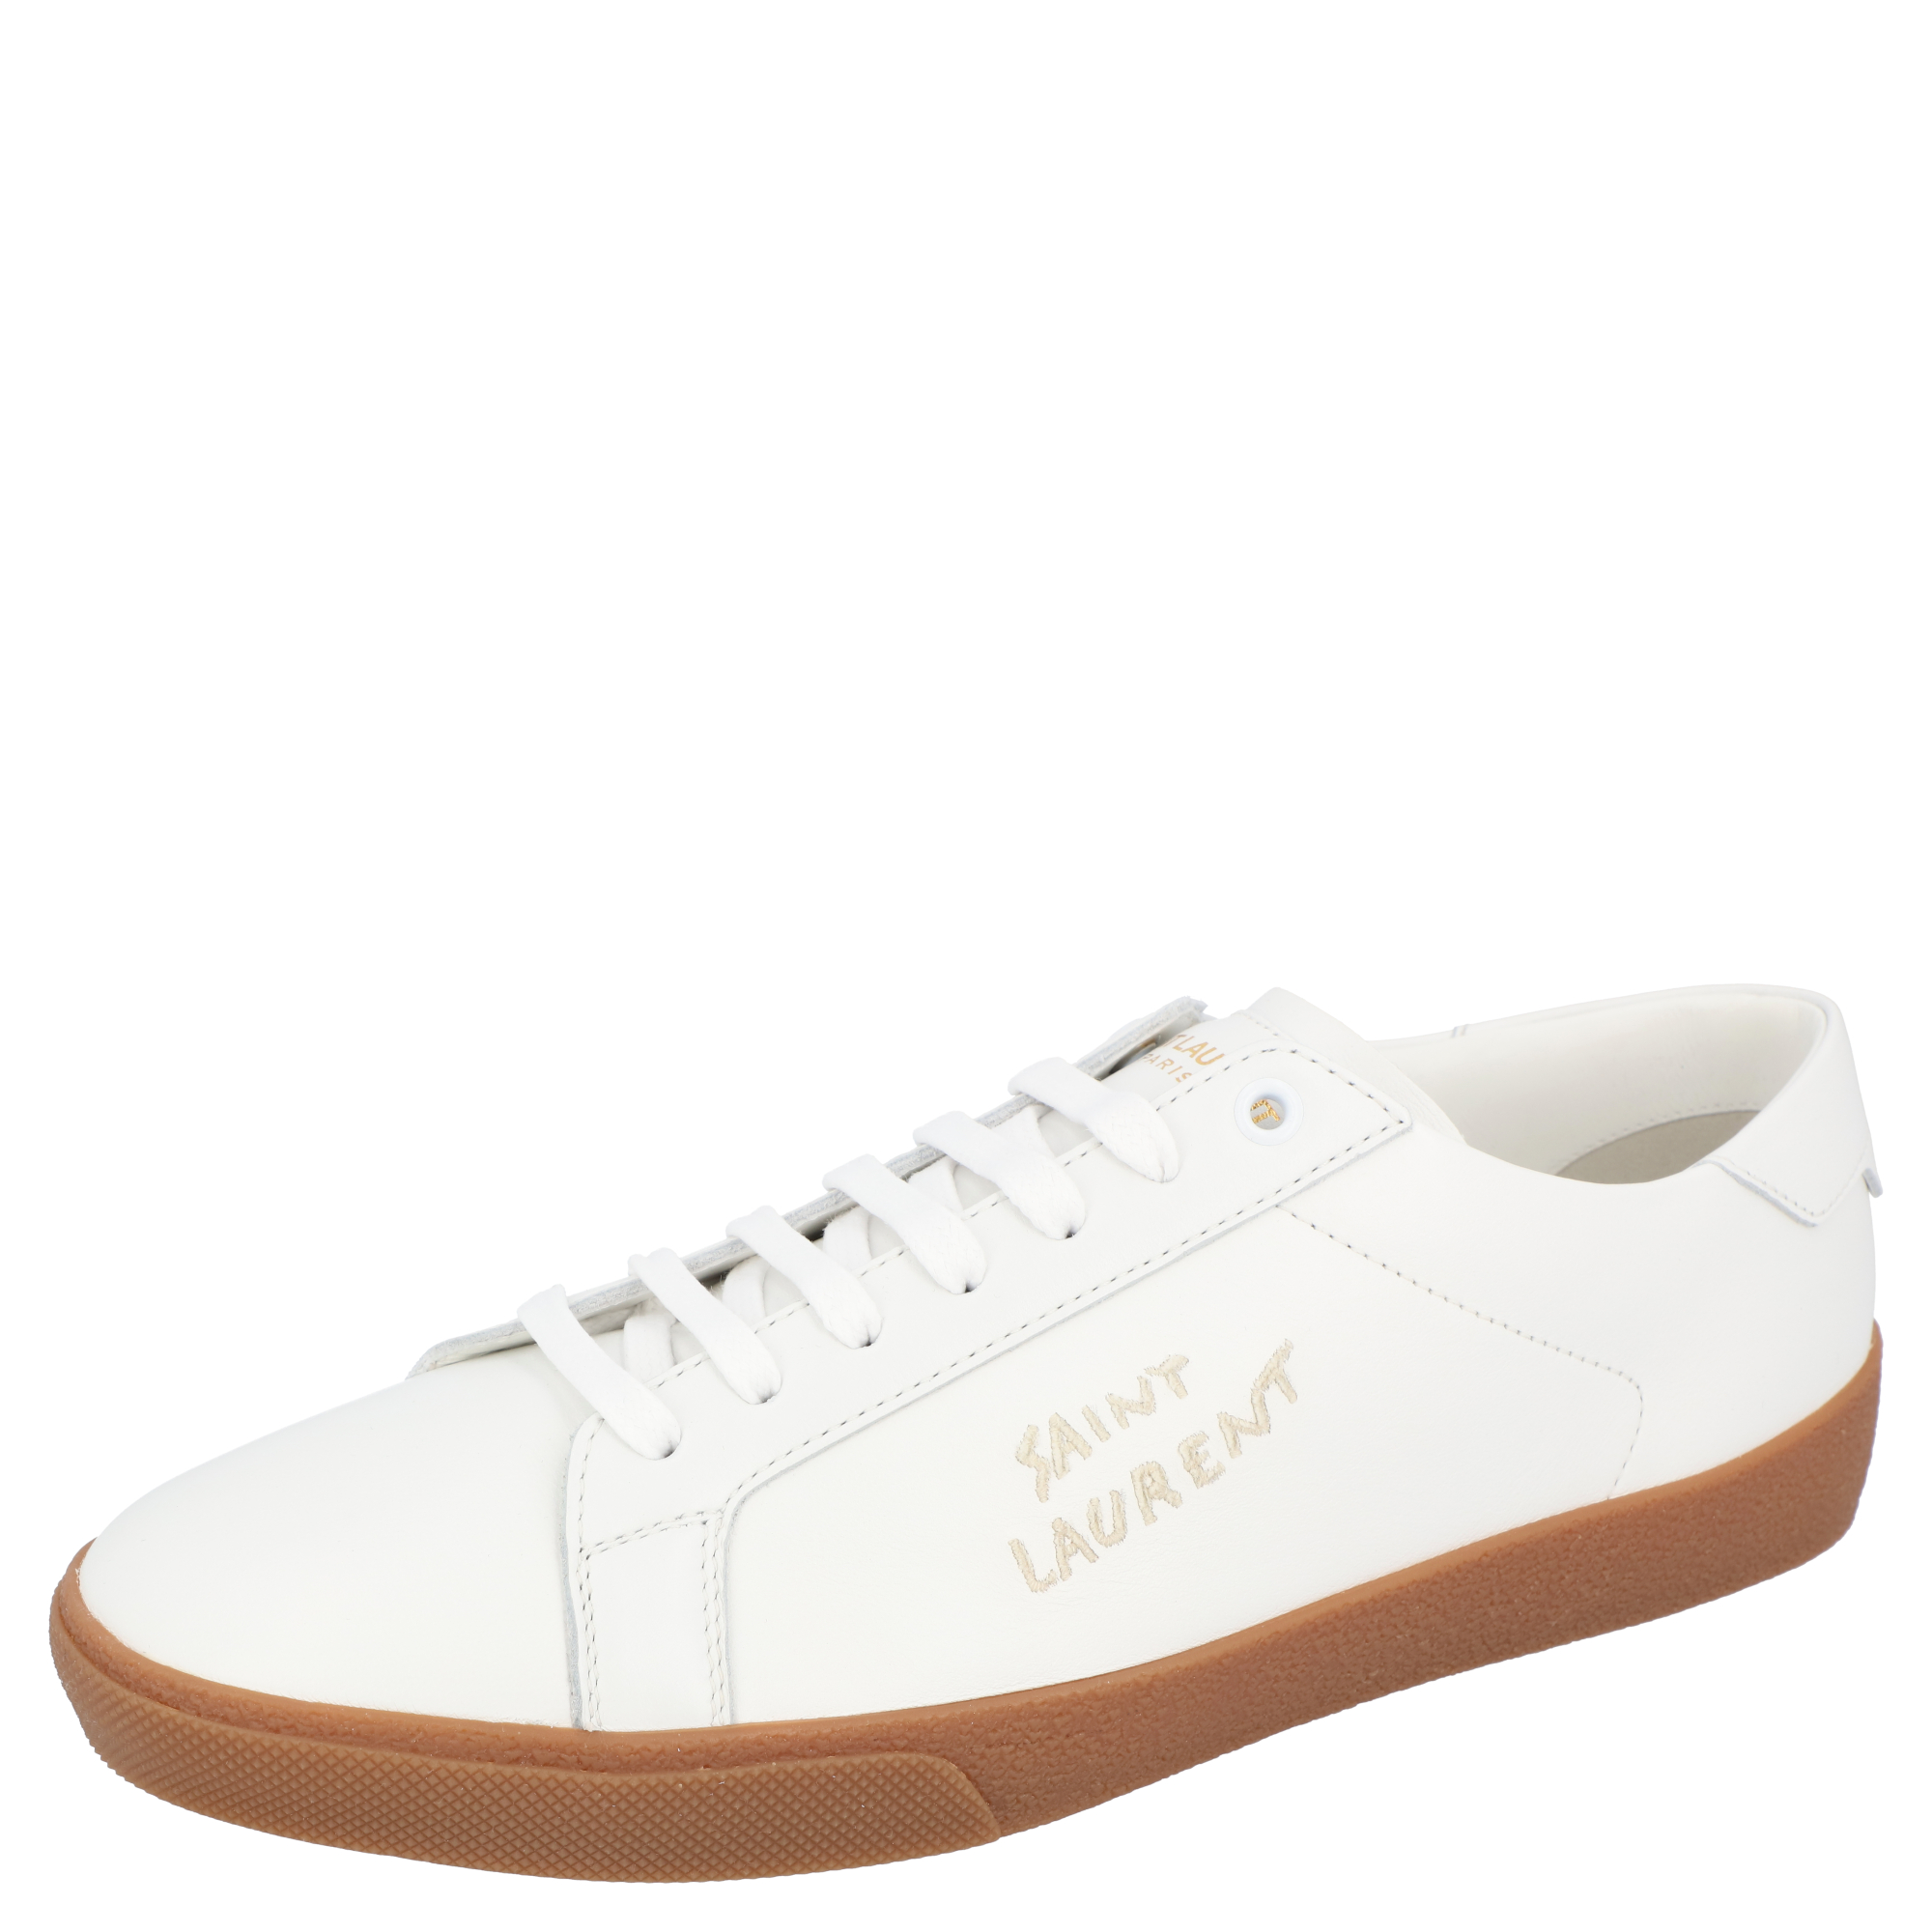 Pre-owned Saint Laurent White Leather Sl/06 Embroidered Court Classic Sneakers Size Eu 42